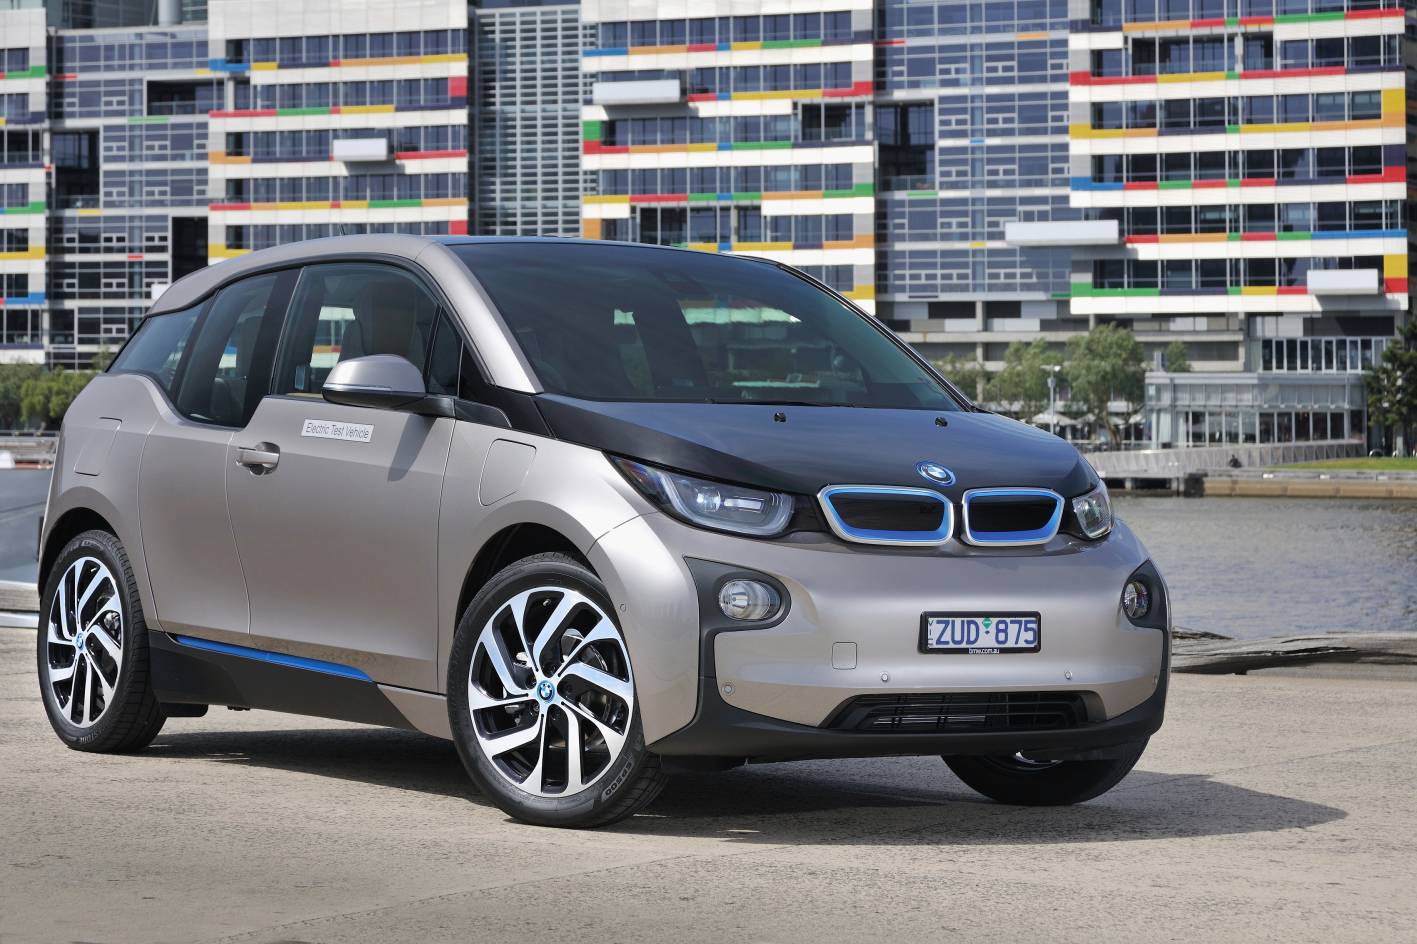 BMW i3 proving popular, pre-orders exceeding expectations